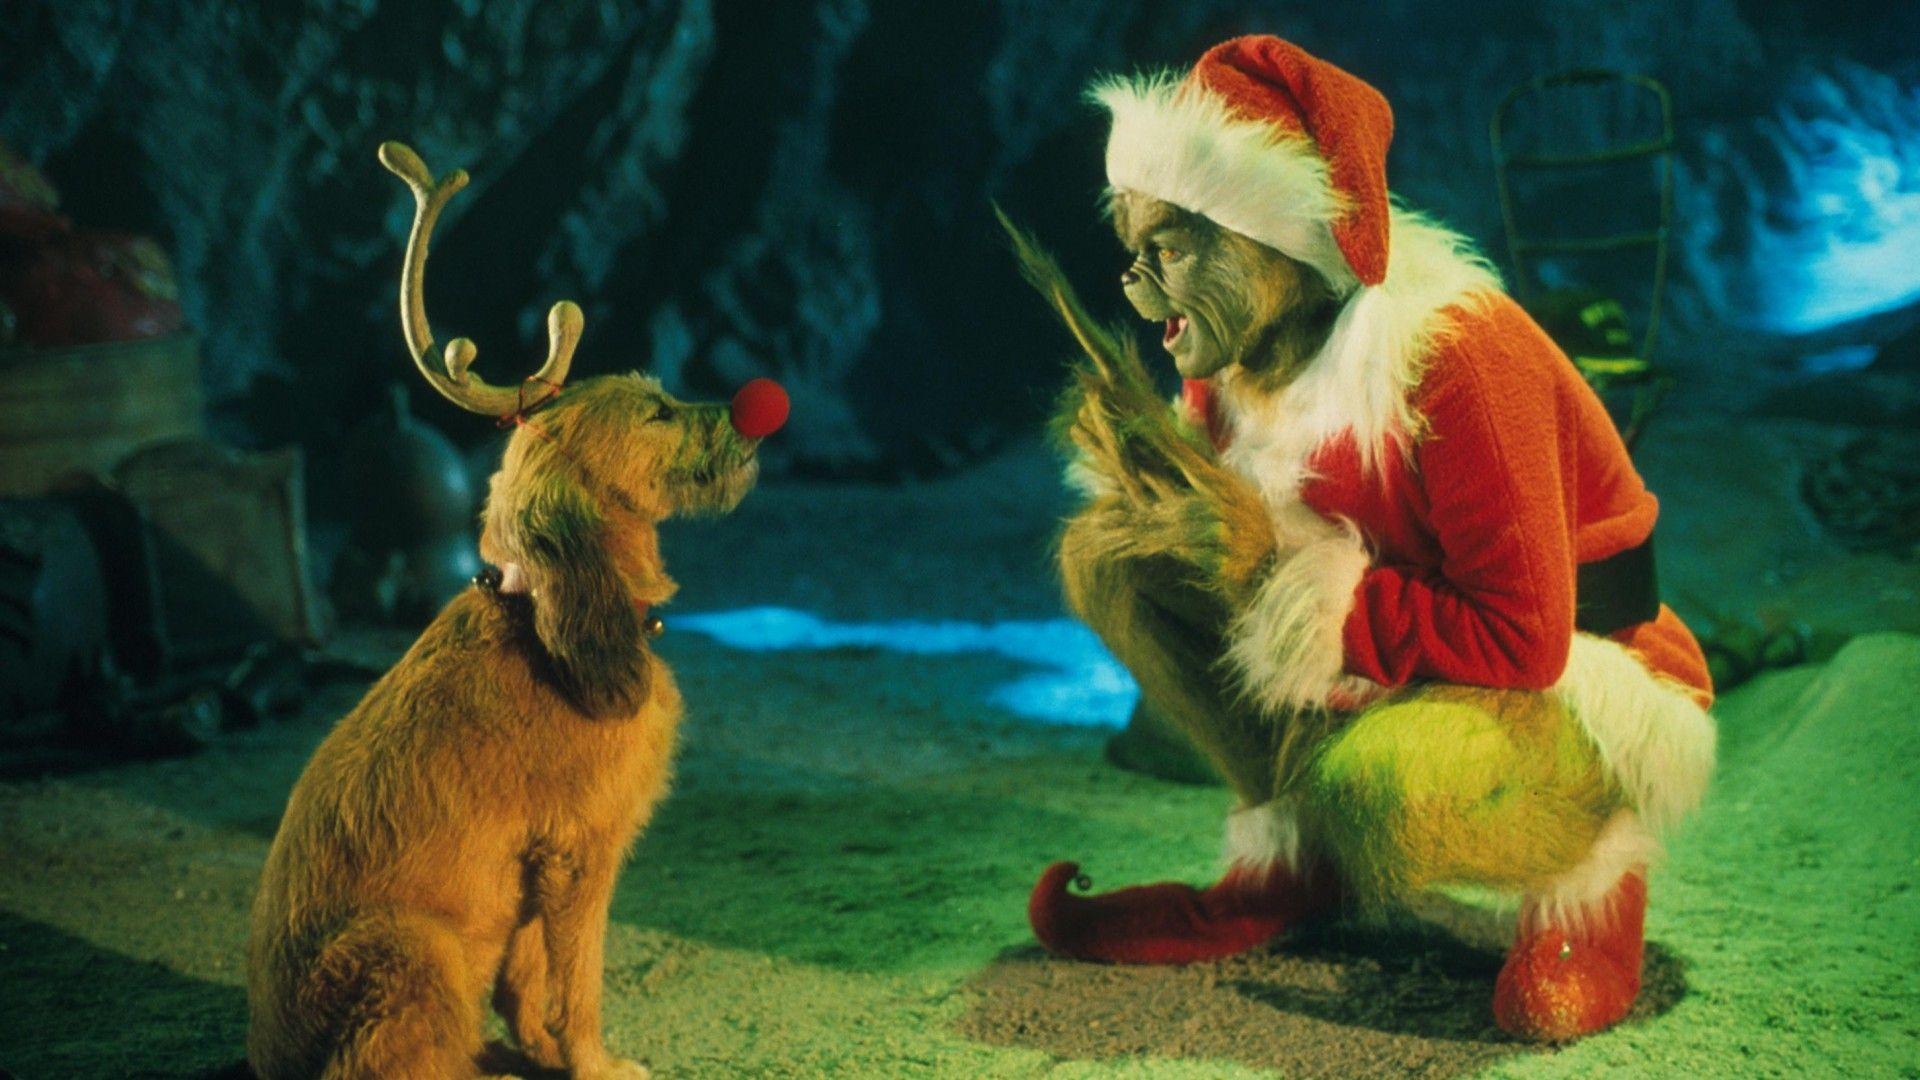 Download Wallpaper 1920x1080 Grinch 8s, Grinch animated, Grinch